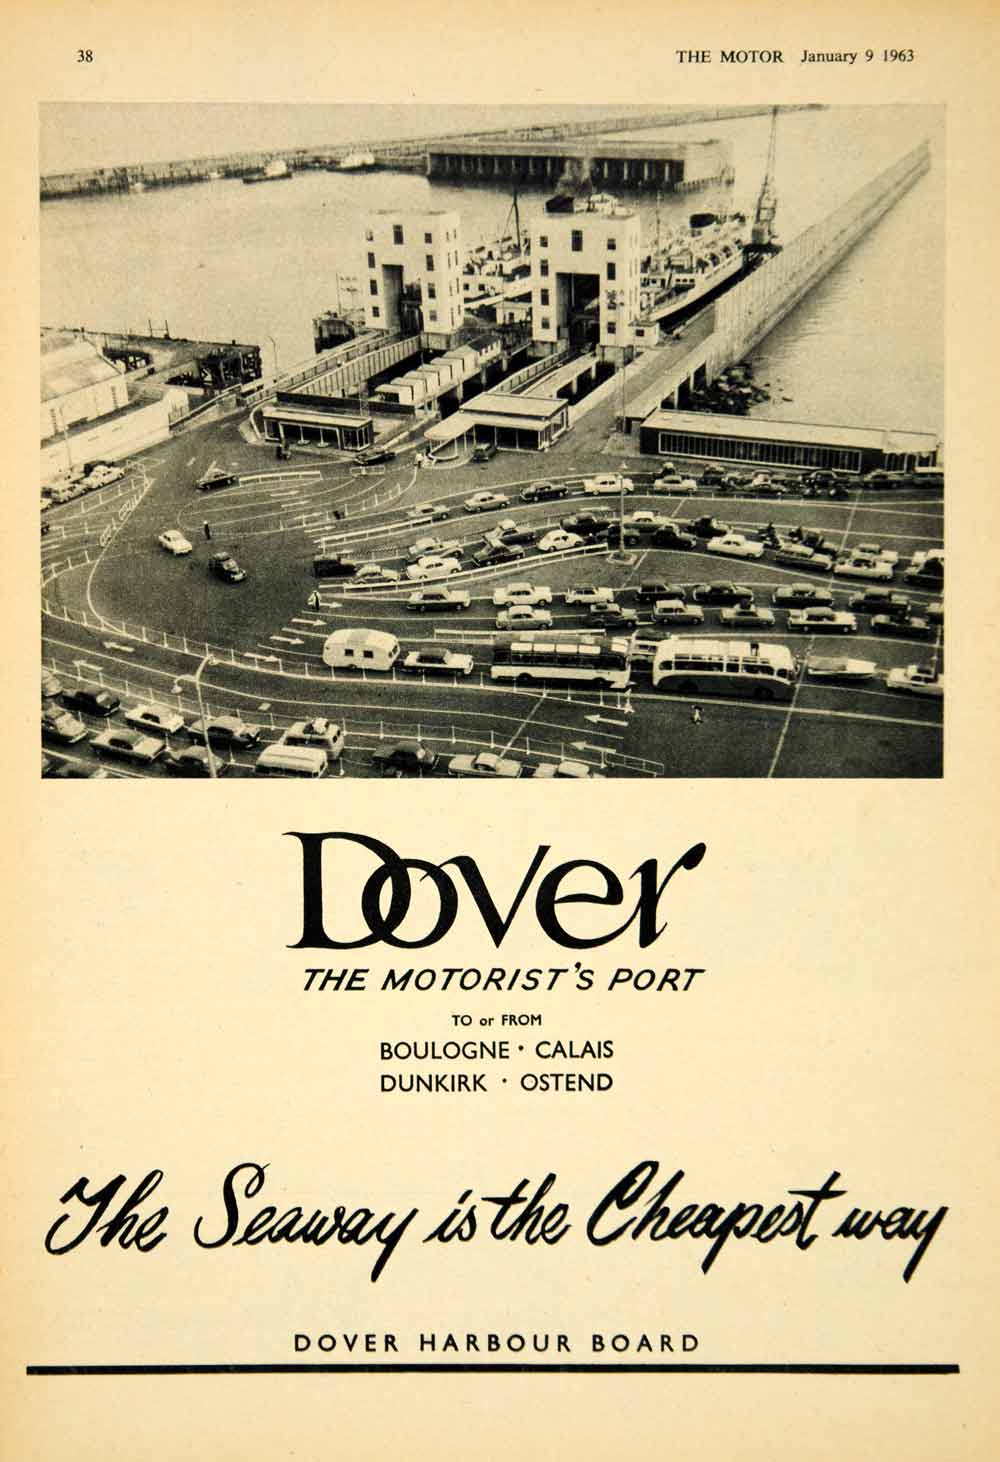 1963 Ad Dover Harbour Board Car Ferry Boat Travel Tourism England YTM5